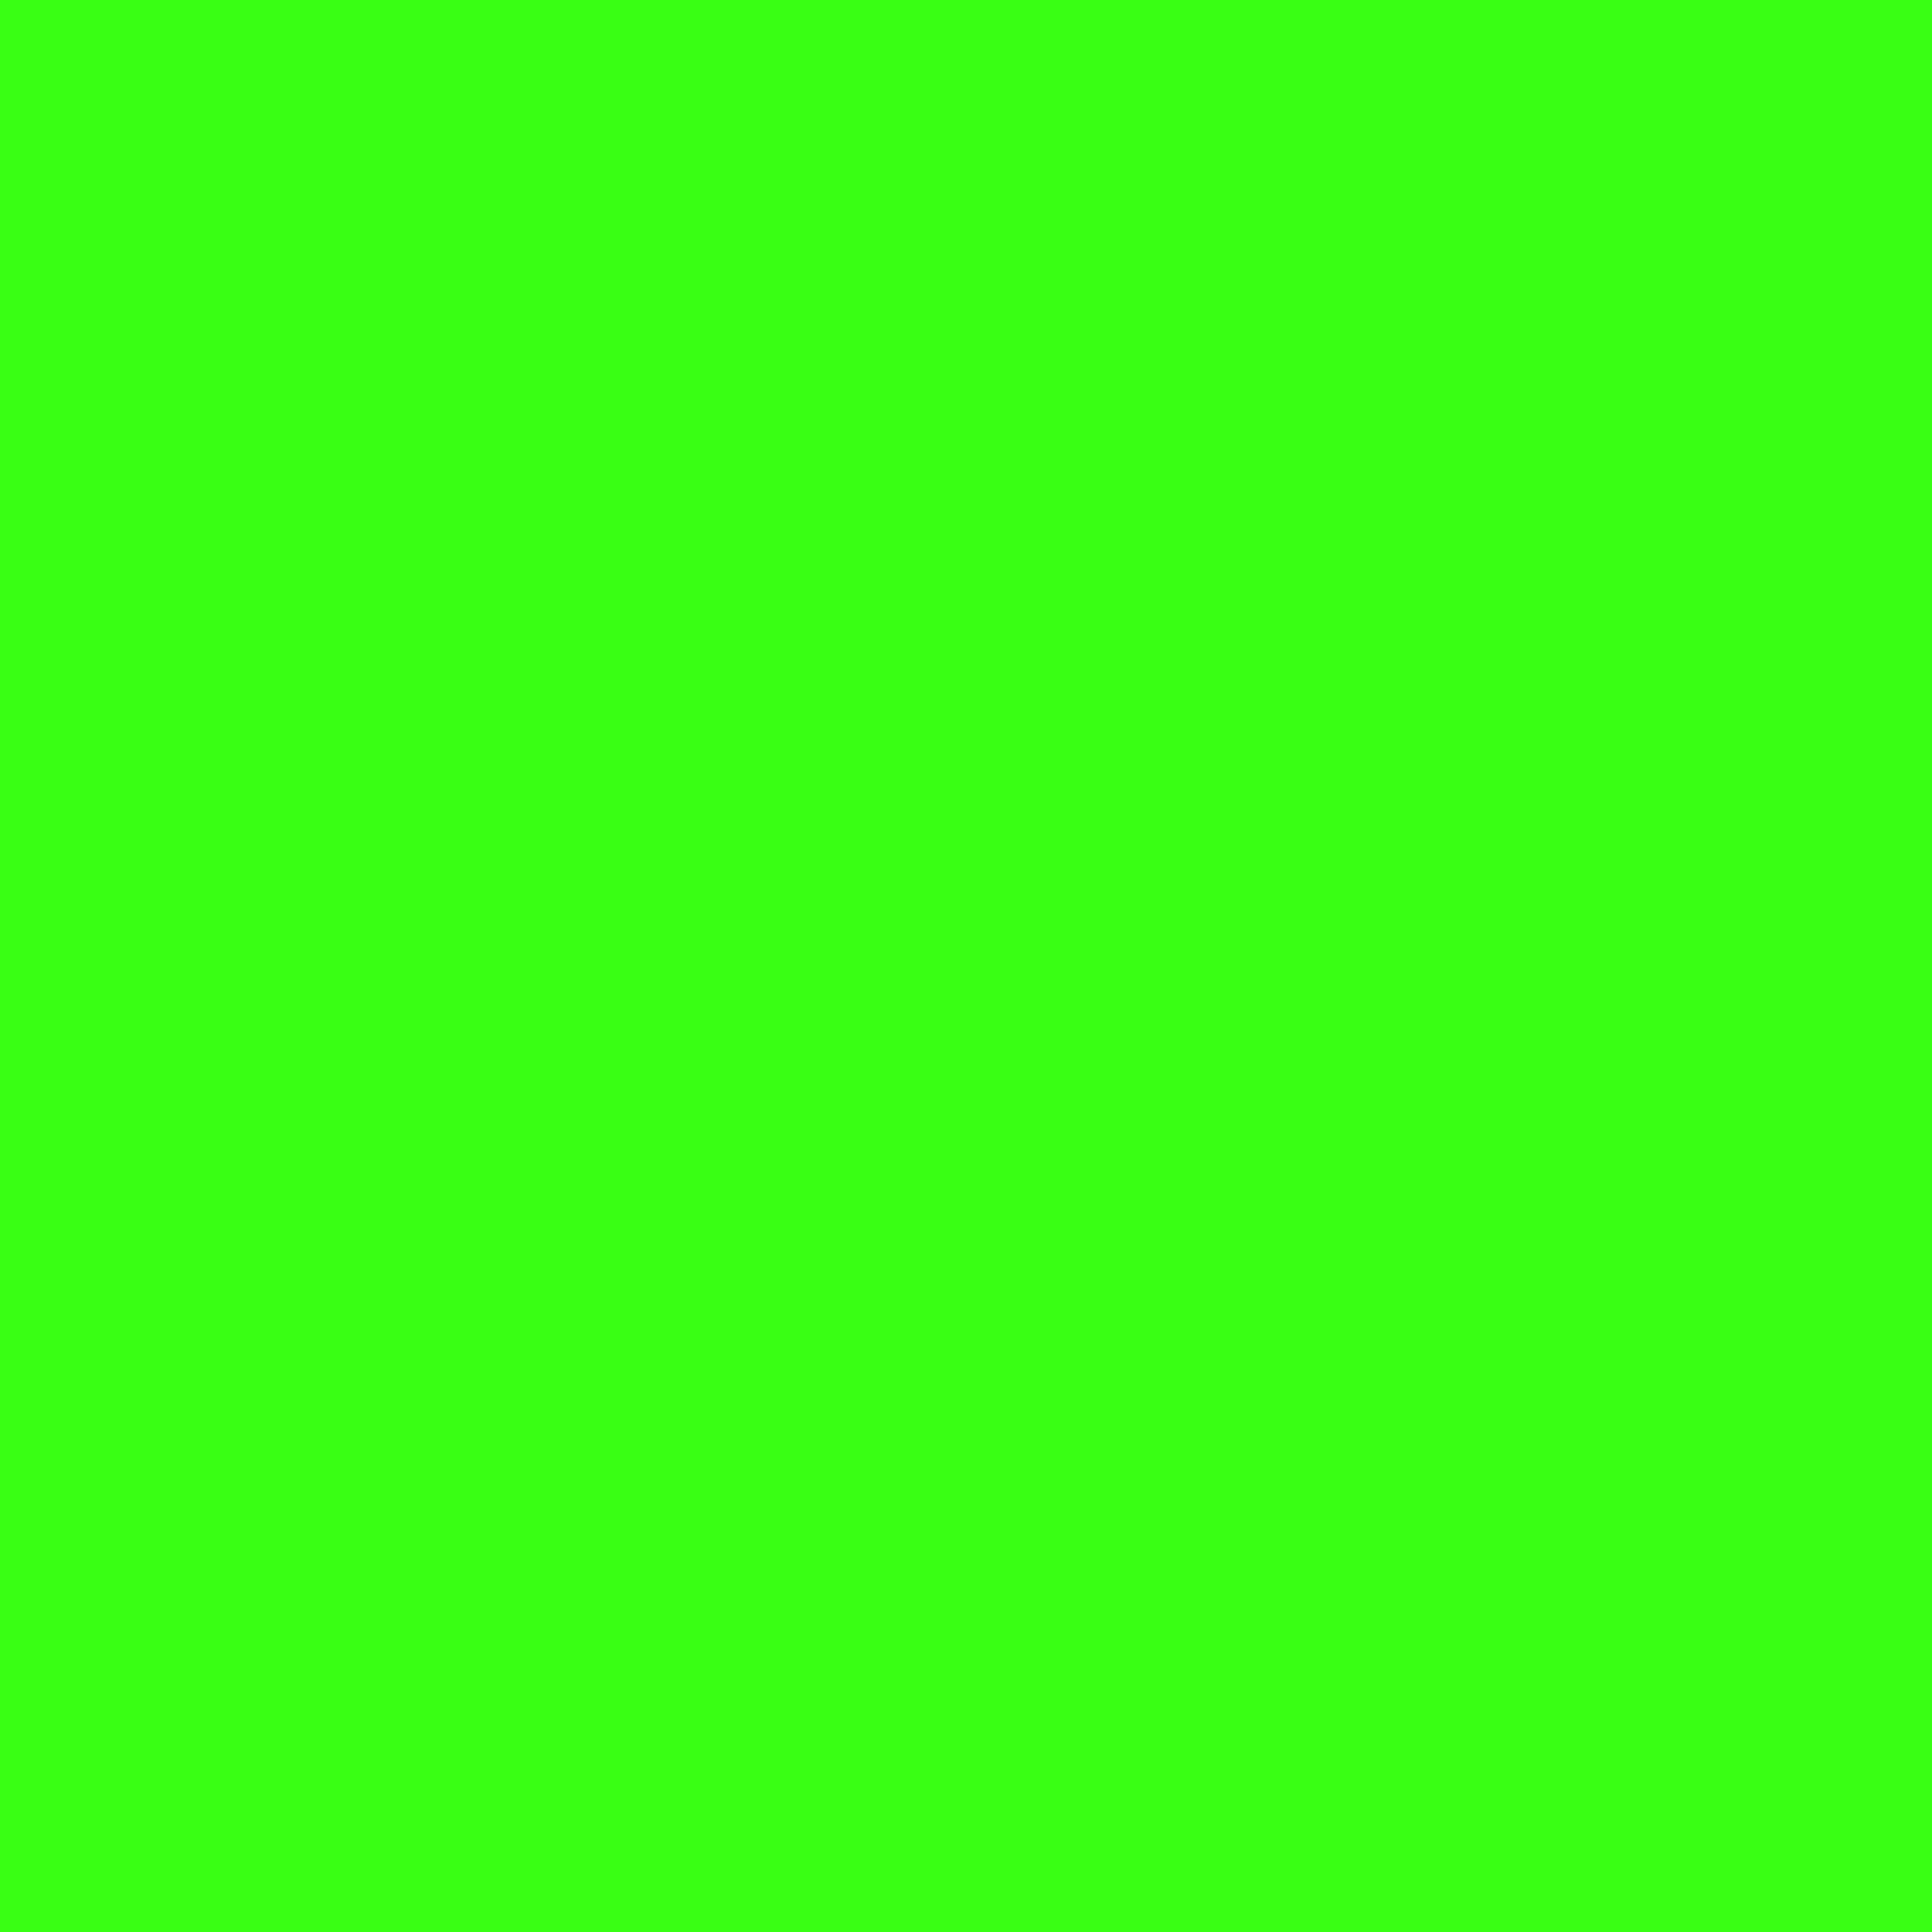 Free 2048x2048 resolution Neon Green solid color background view and